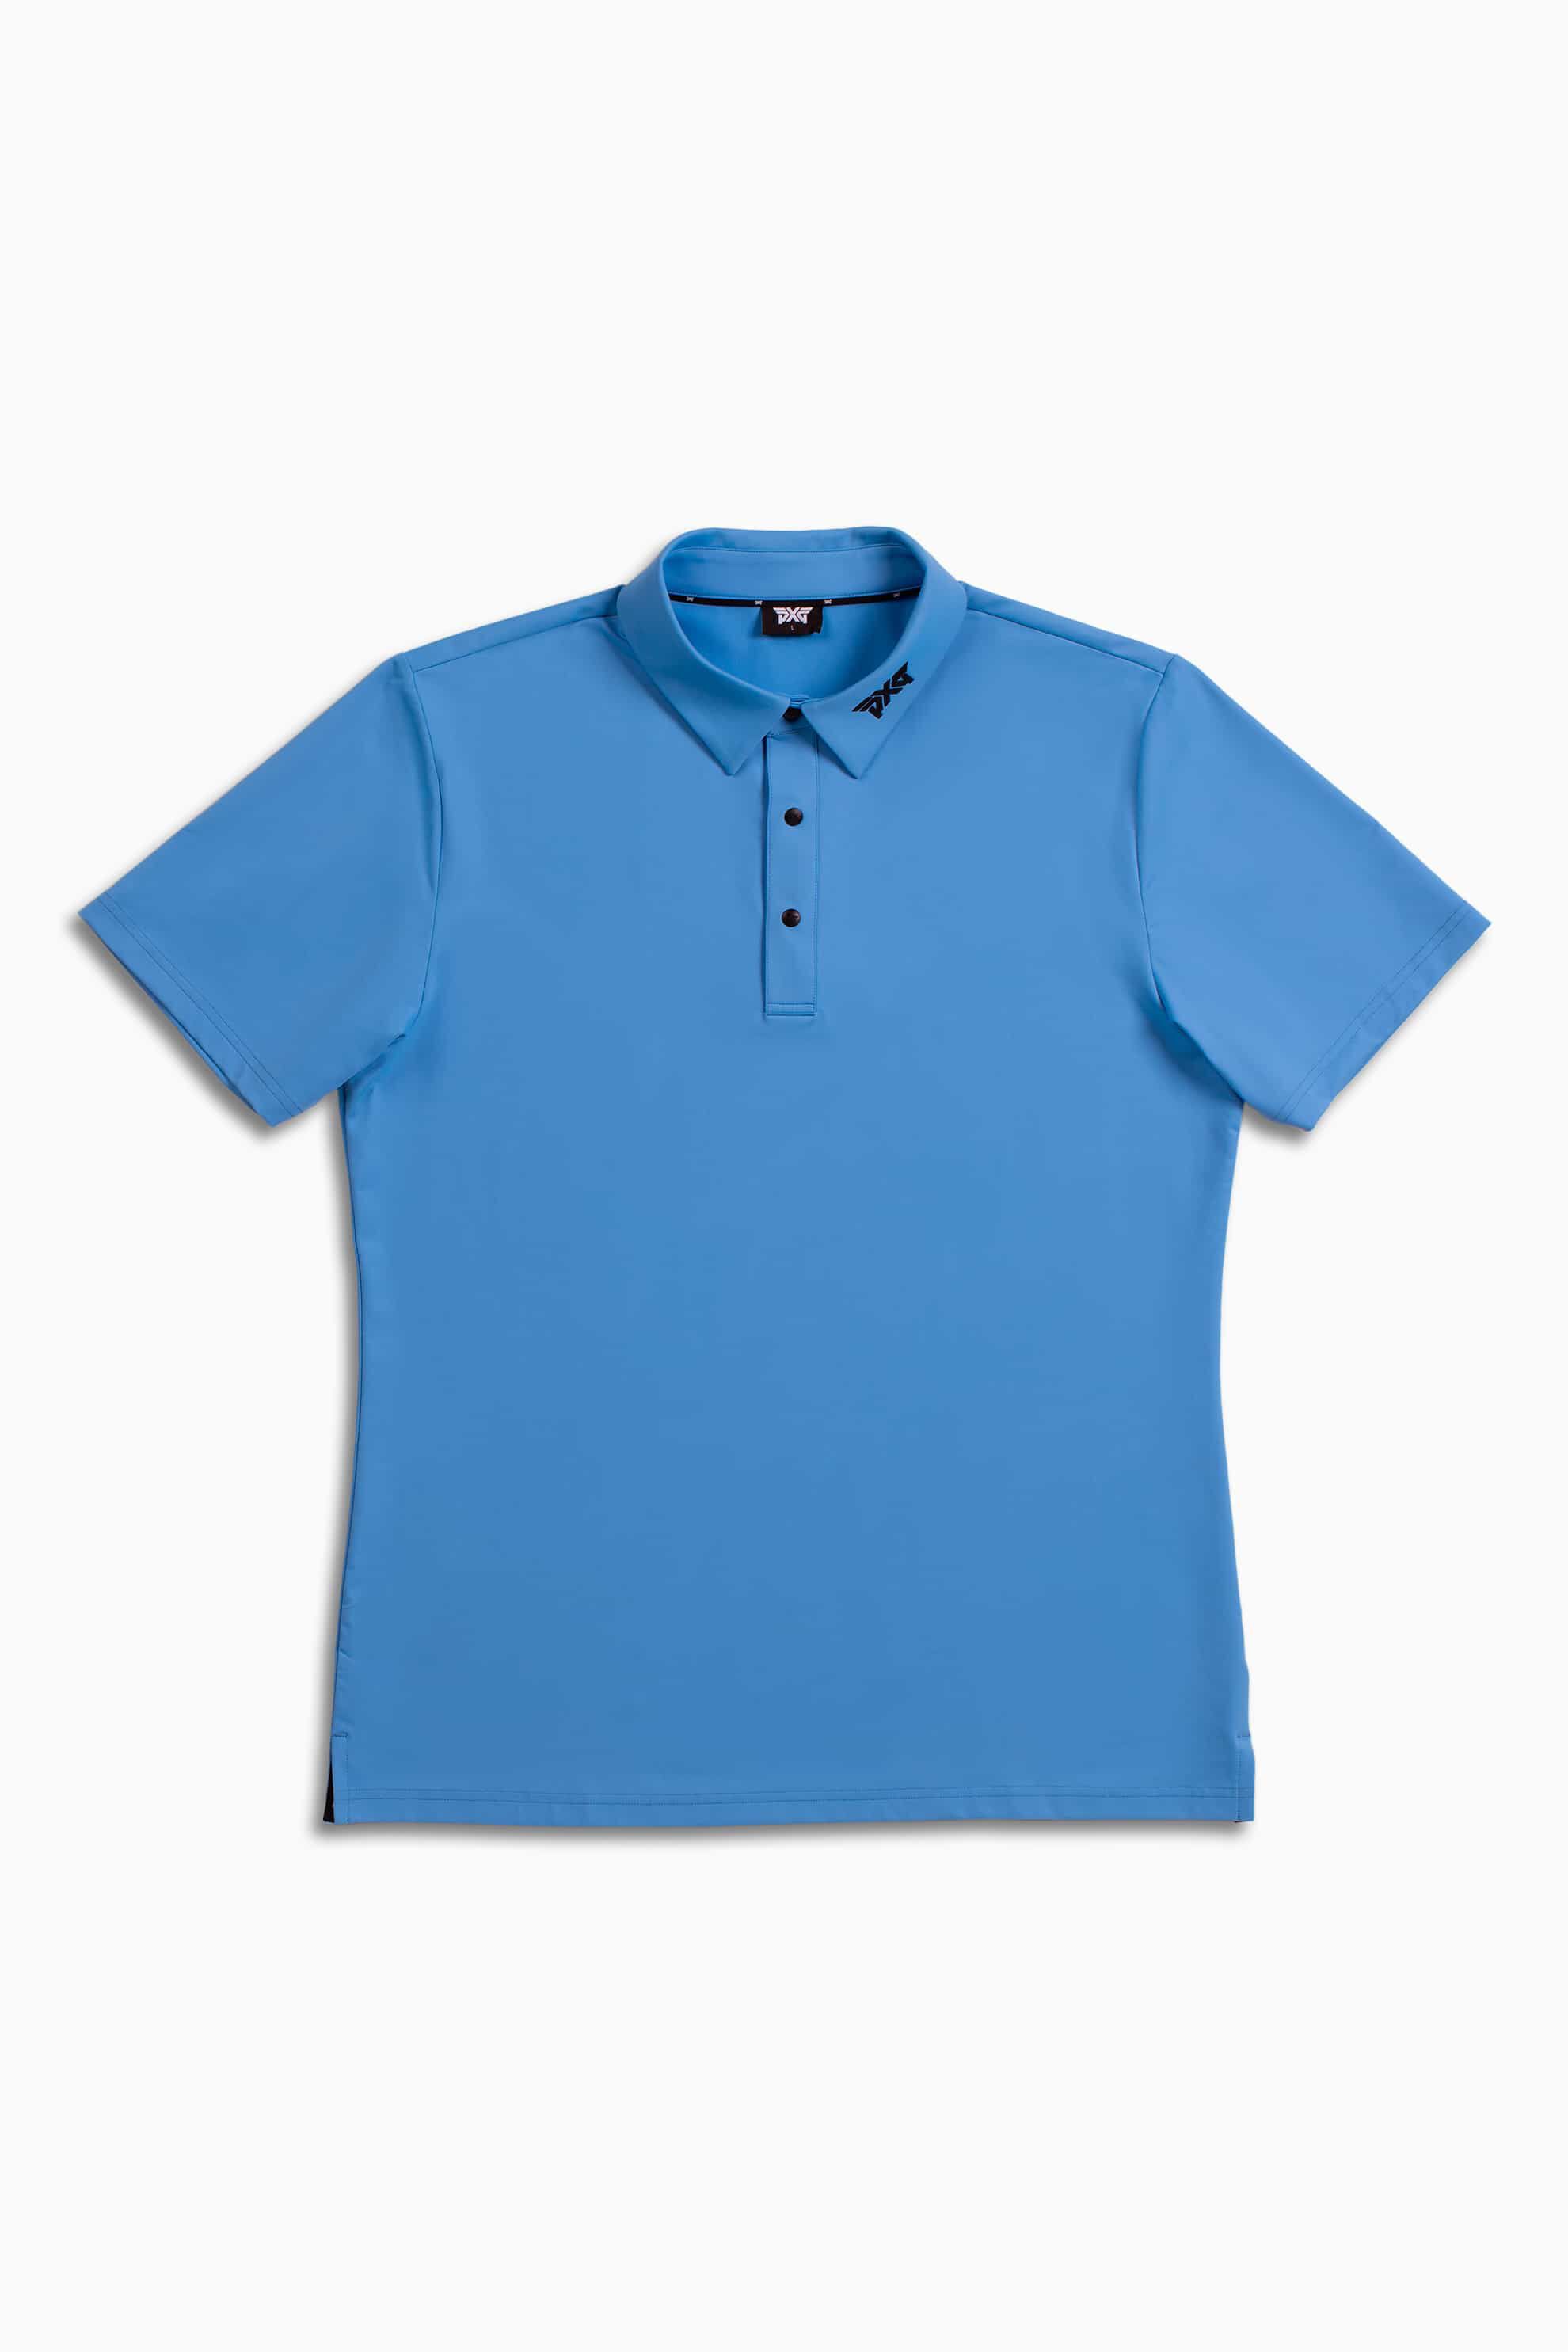 Shop Men's Golf Clothes and Apparel - Online or In-Store | PXG JP